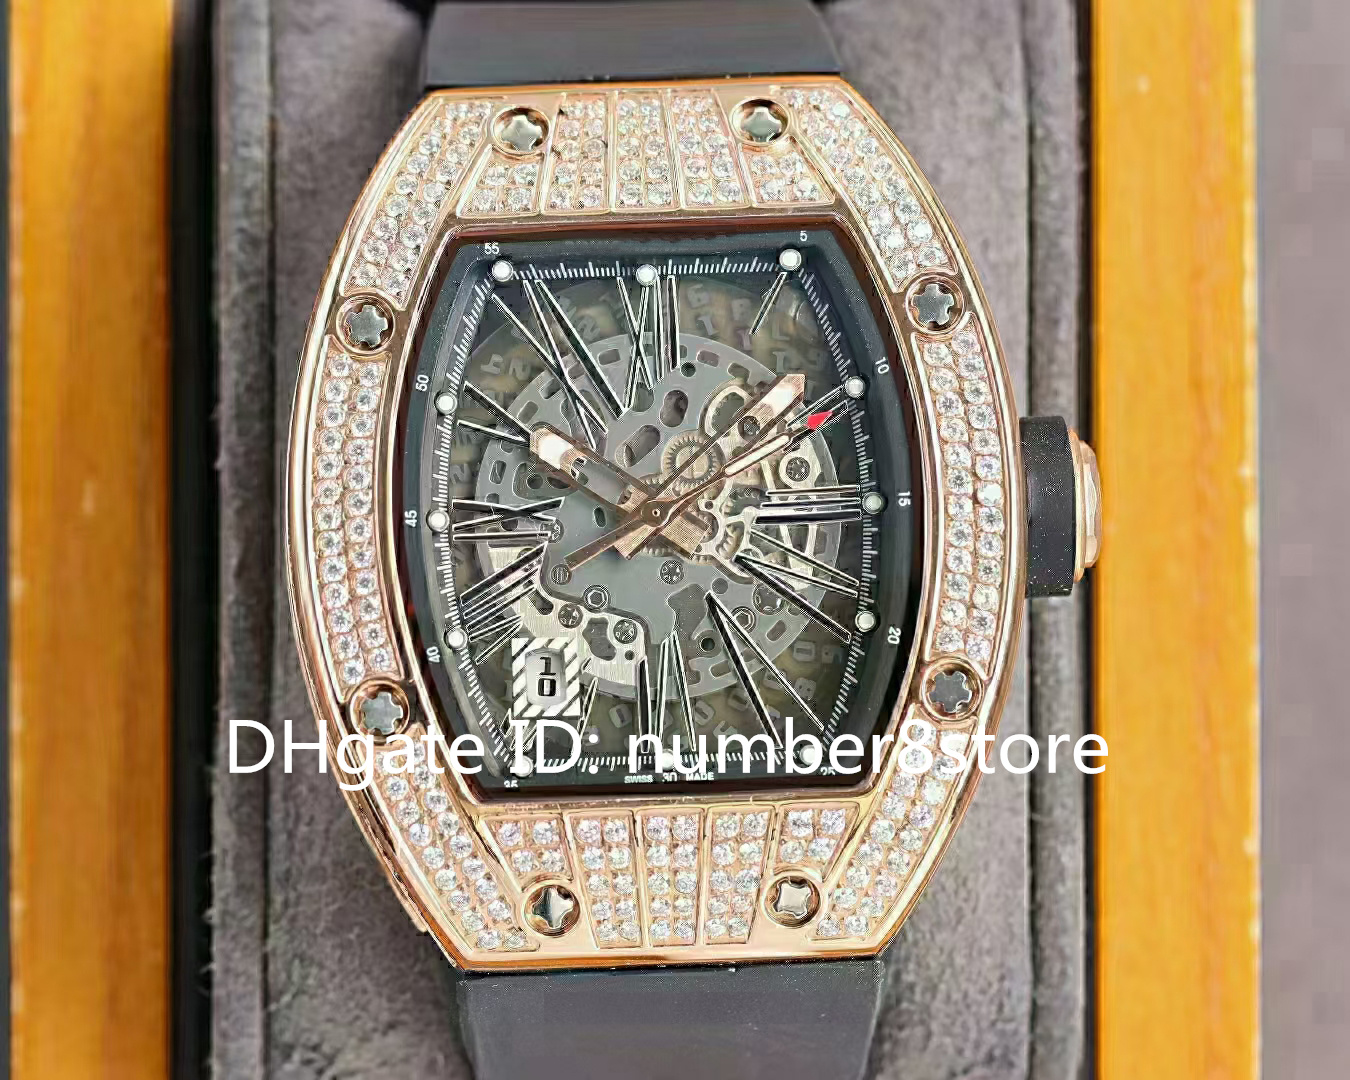 RM010 Diamond Luxury Mens Watch 18K Rose Gold Tonneau Sport Wristwatch Swiss Automatic Mechanical OpenWorked Dial Sapphire Crystal Water Resistant Watches